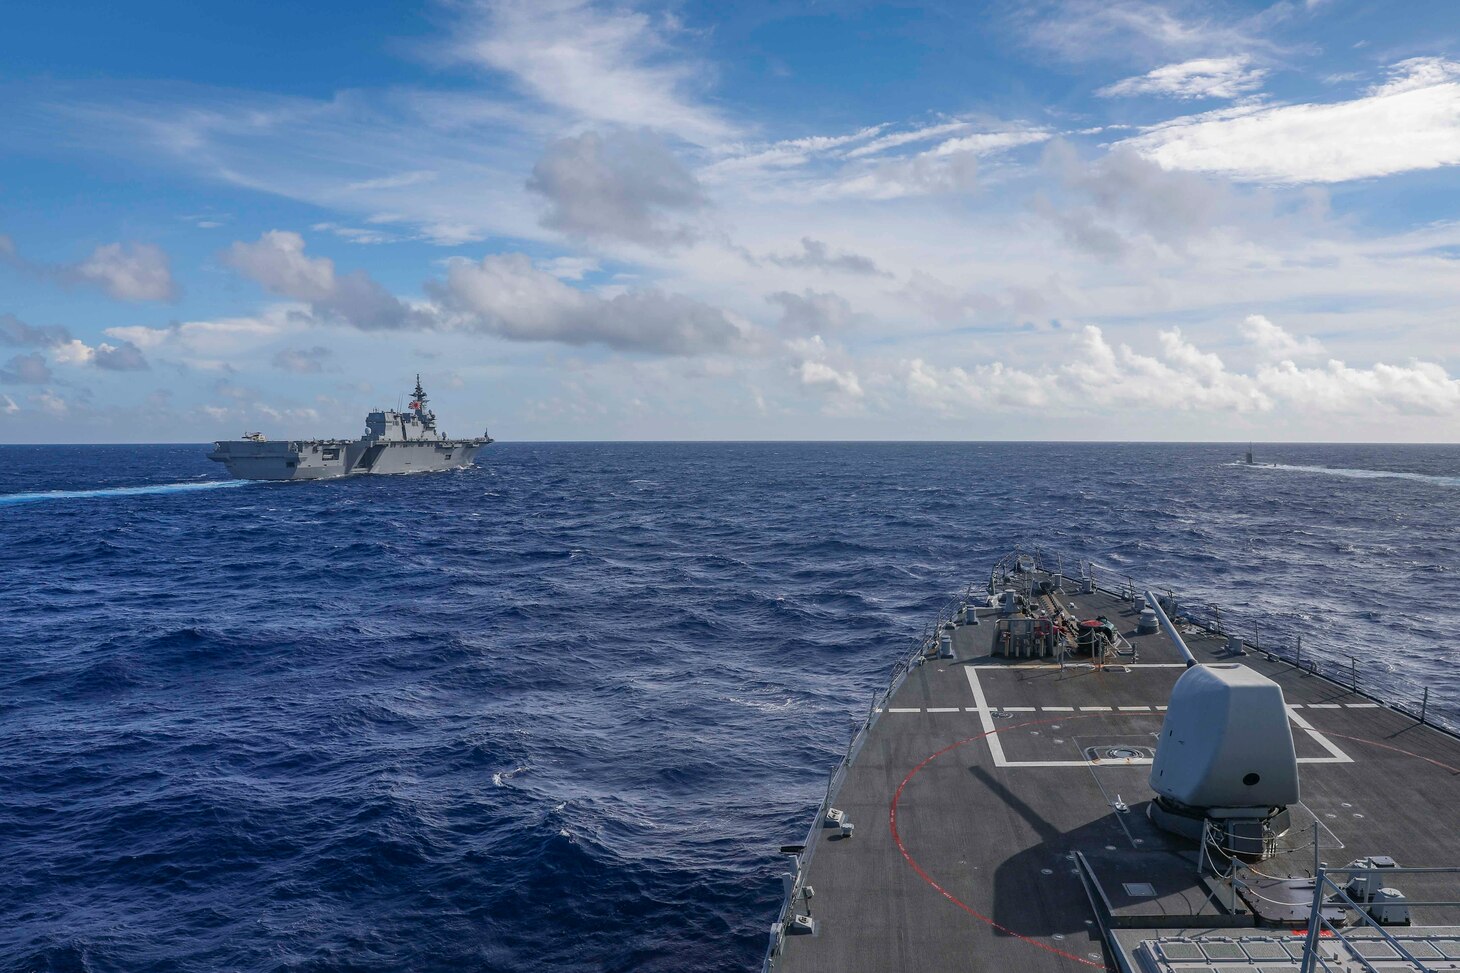 Arleigh Burke-class guided-missile destroyer USS Higgins (DDG 76), center, cruises in formation with Izumo-class multi-purpose destroyer JS Izumo (DDH 183) left, and  a Japanese submarine while conducting routine operations in the South China Sea, Oct. 1. Higgins is participating in multi-lateral exercises in the South China Sea in support of the Japan Maritime Self-Defense Force’s Indo-Pacific deployment, along with the Royal Canadian Navy. Routine multi-lateral exercises like this strengthen interoperability and our mutual commitment to maintaining a free and open Indo-Pacific.  (U.S. Navy photo by Mass Communication Specialist 1st Class Donavan K. Patubo)